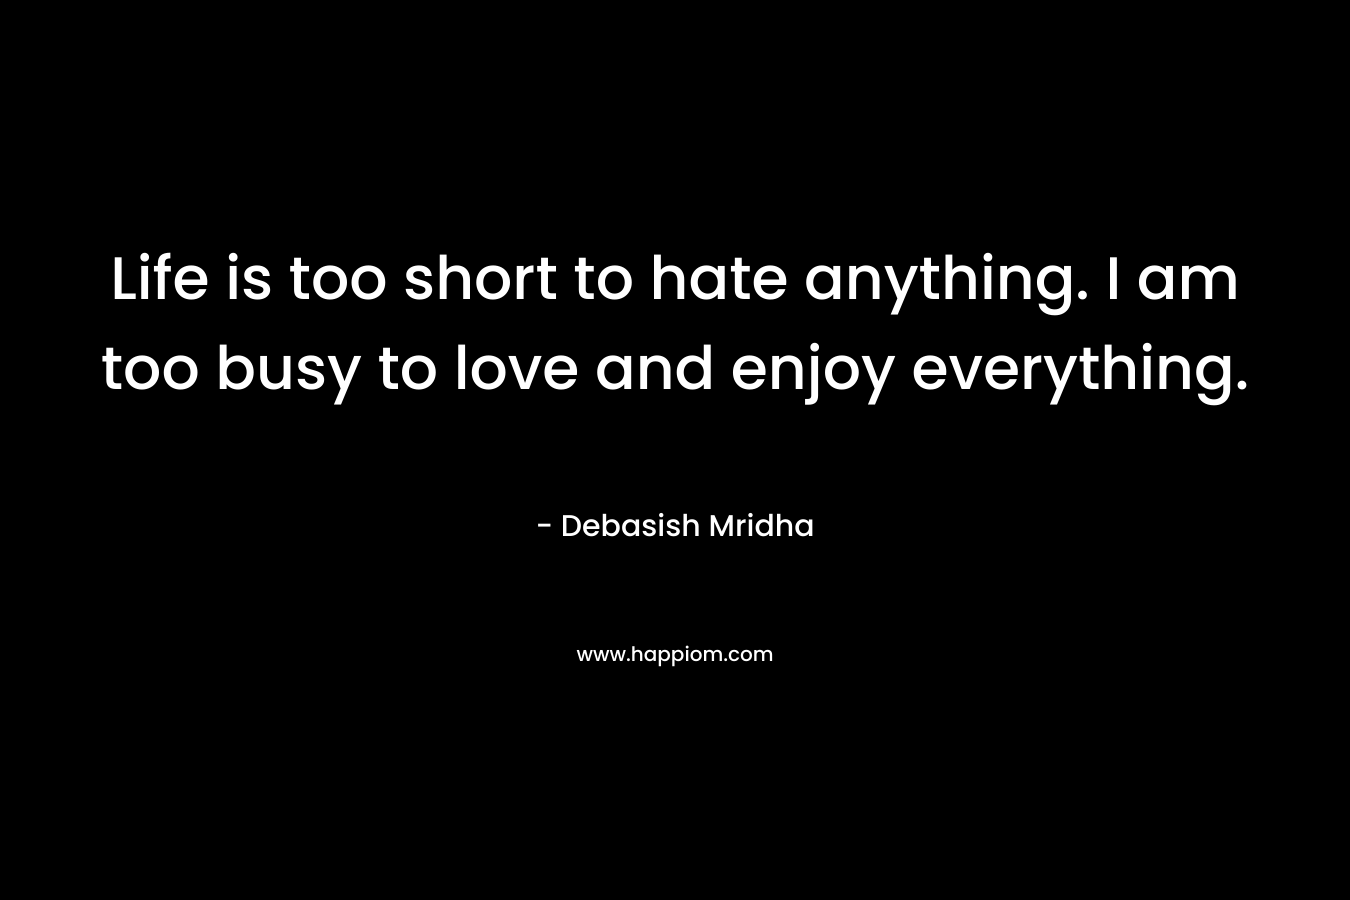 Life is too short to hate anything. I am too busy to love and enjoy everything.